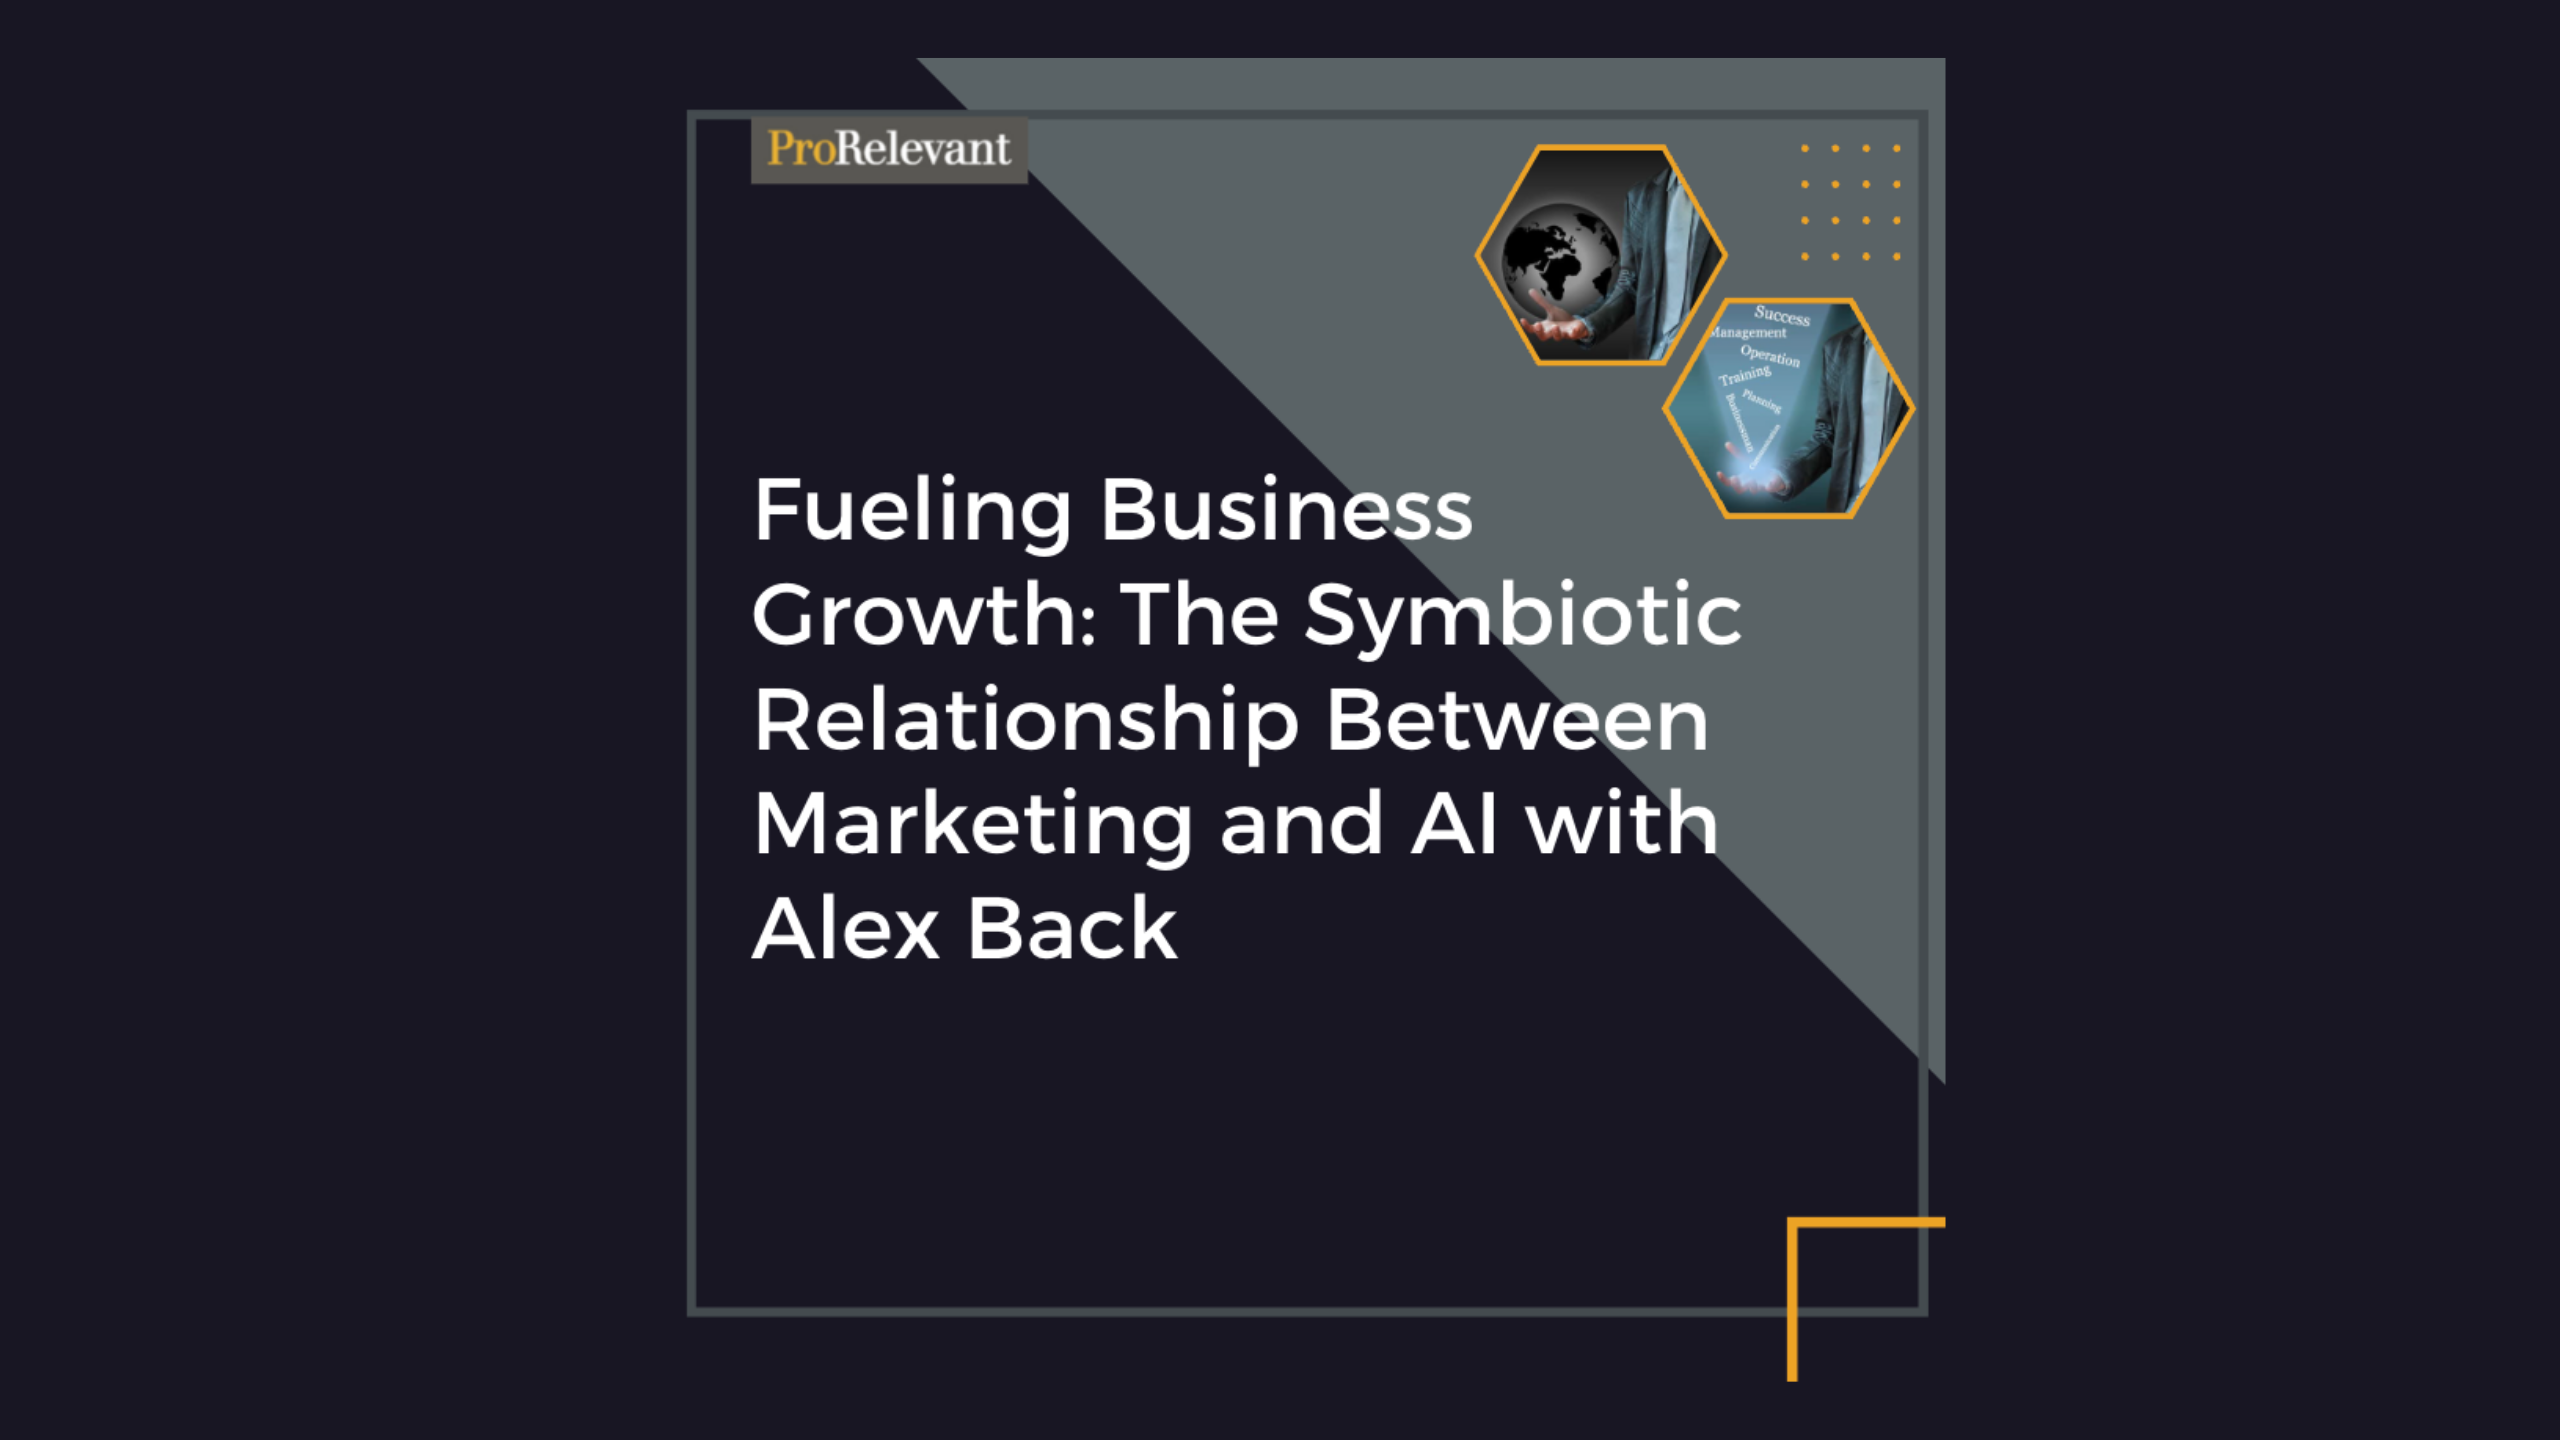 A graphic titled "Fueling Business Growth: The Symbiotic Relationship Between Marketing and AI with Alex Back" by ProRelevant. It includes hexagonal images of a lion and a robot, along with geometric design elements on a dark background.